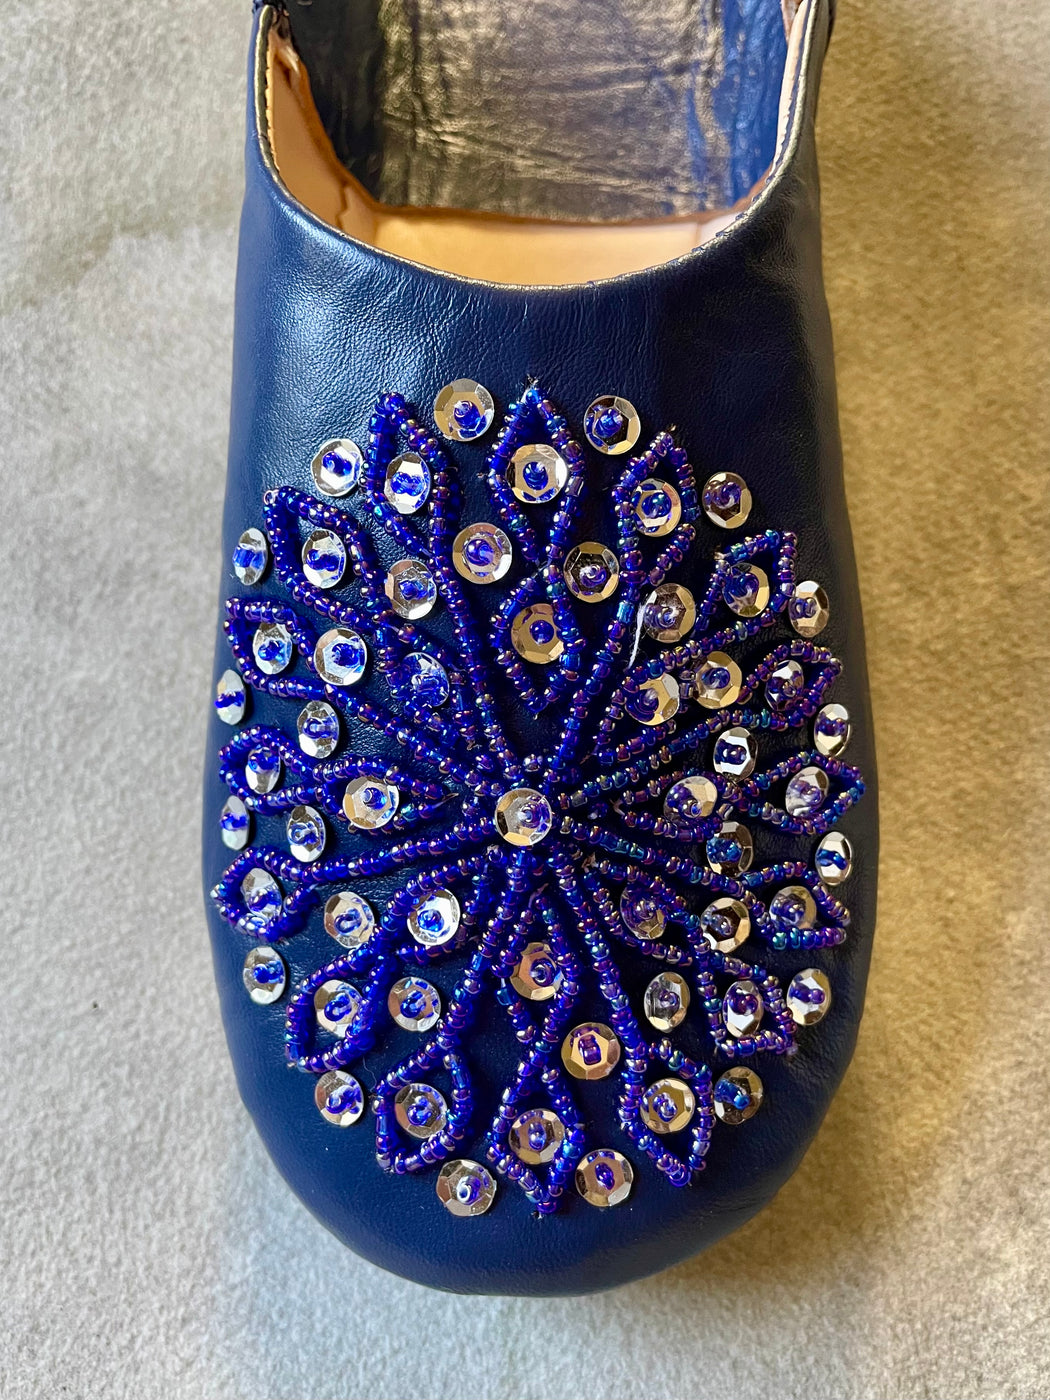 Beaded Moroccan Slippers - Navy